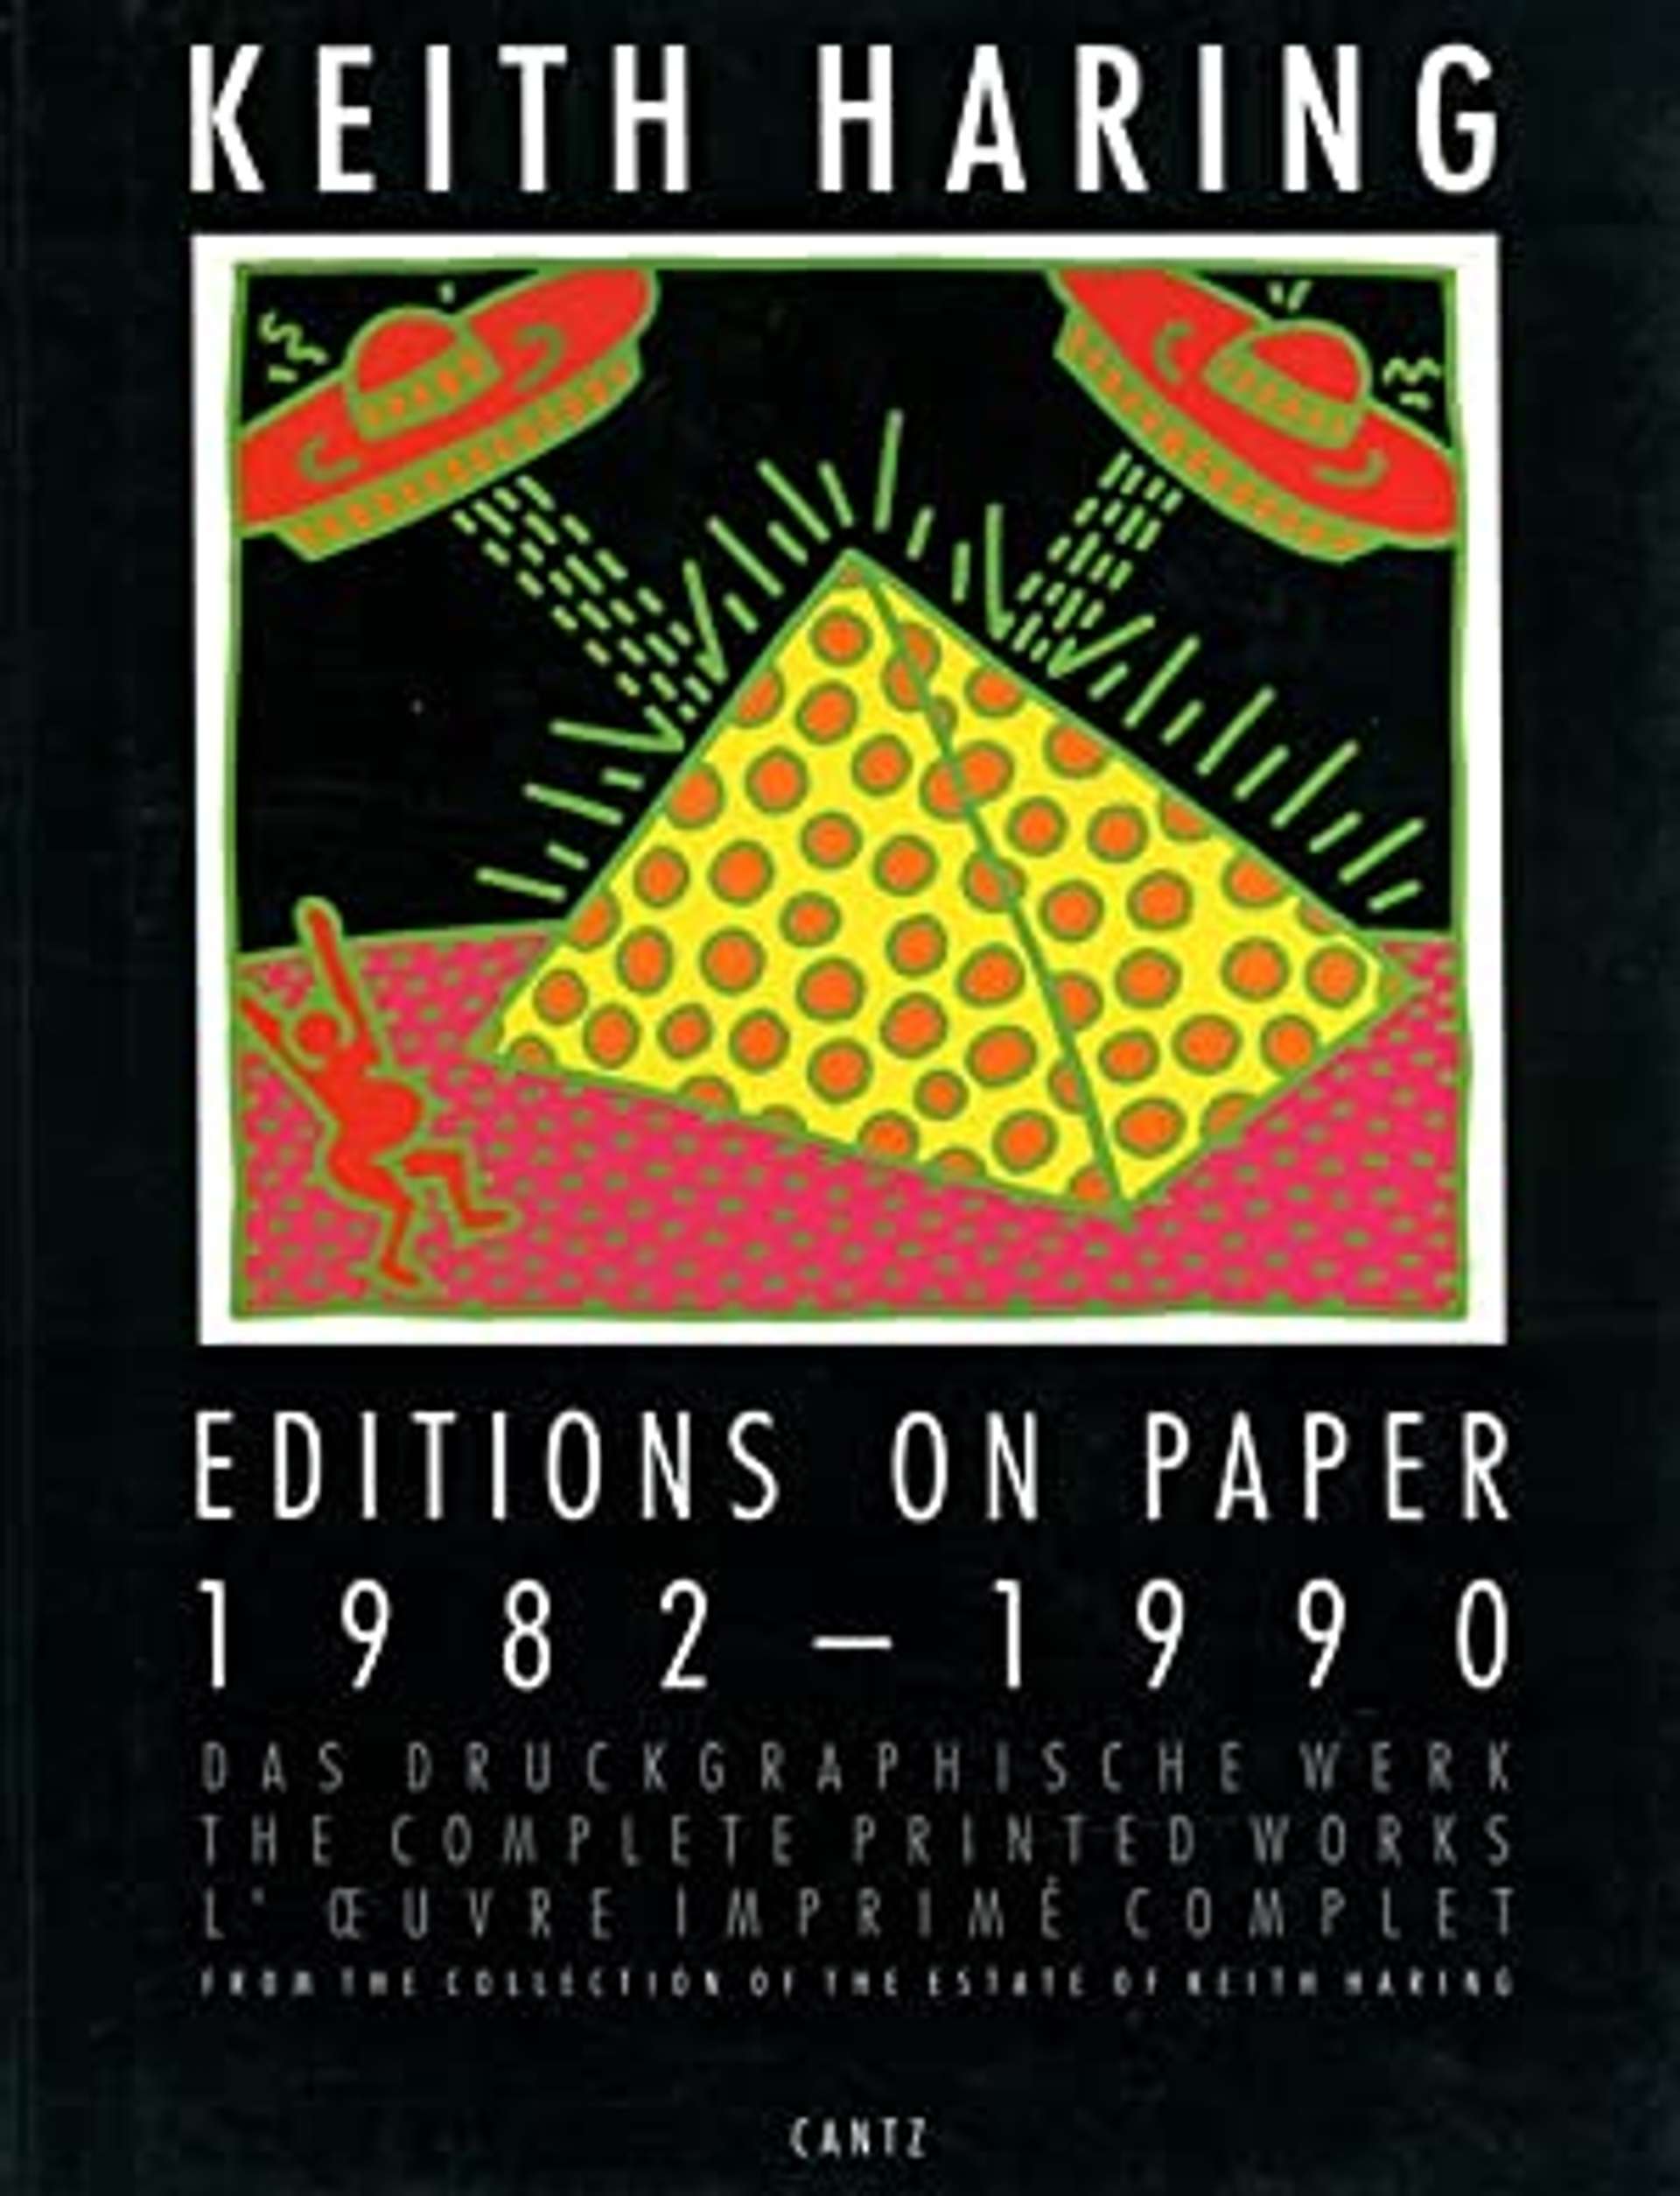 Keith Haring, Cover of "Editions on Paper 1982-1990", Werner Jehle - MyArtBroker